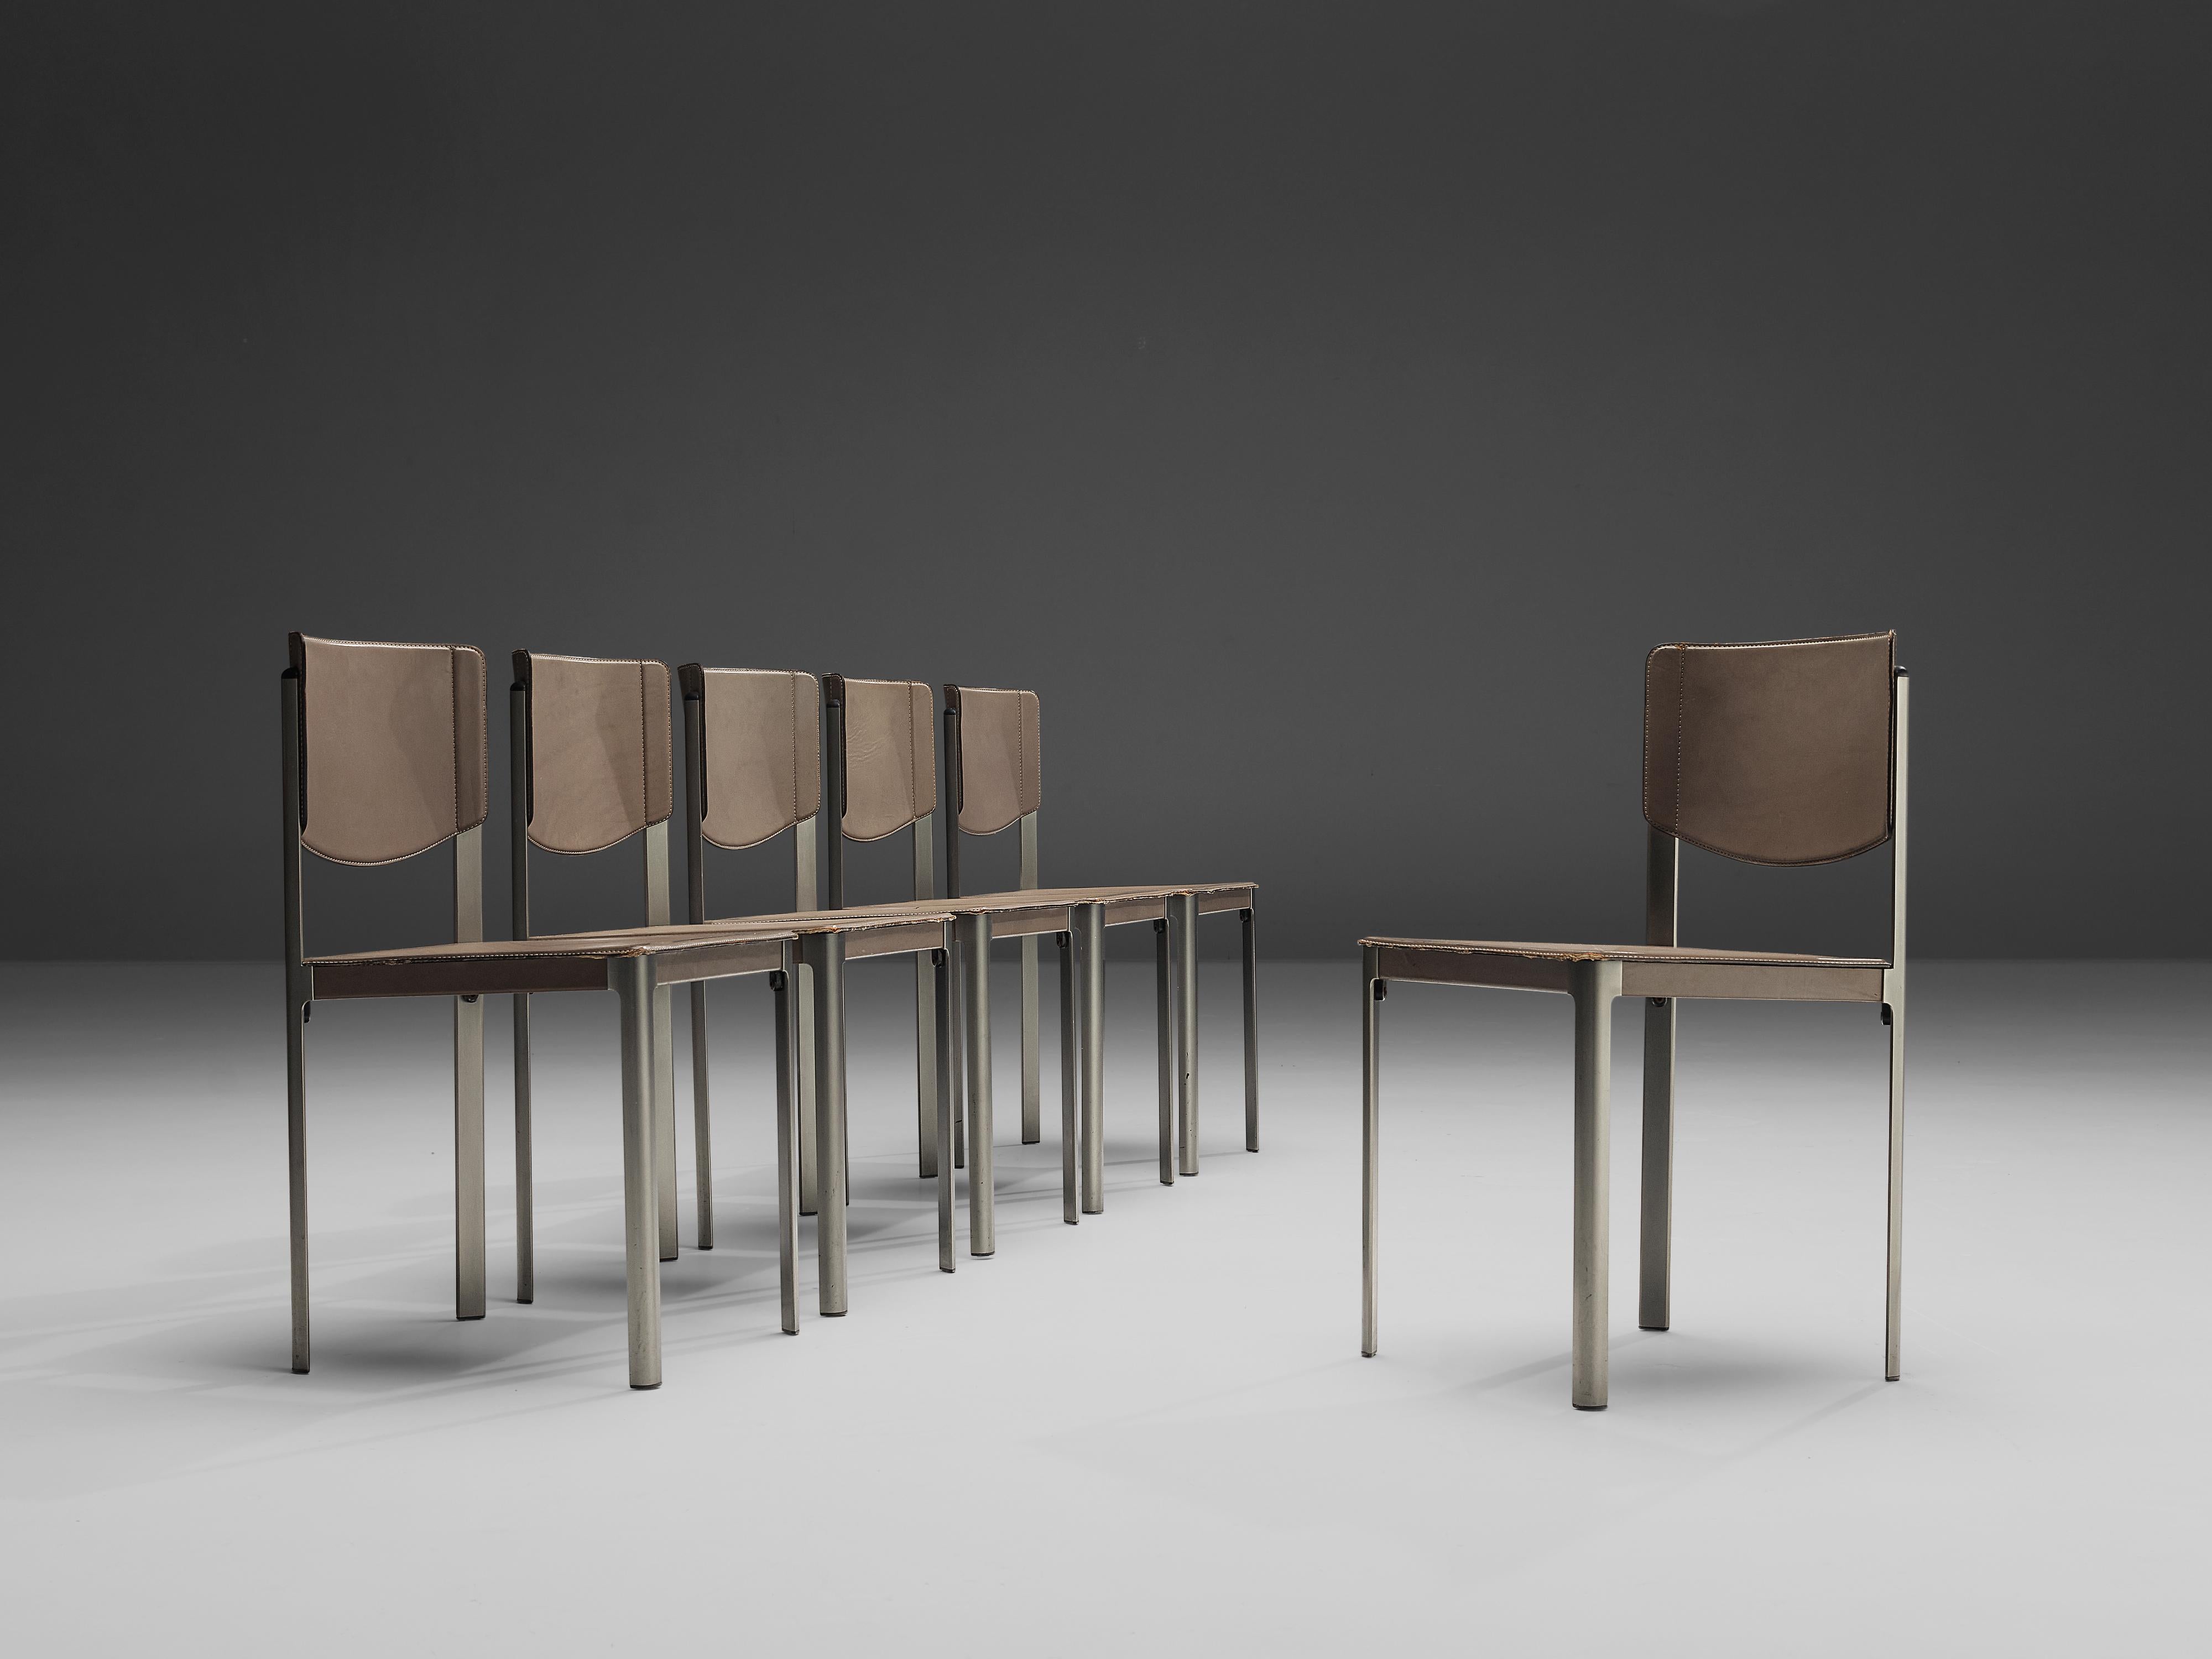 Matteo Grassi, set of six dining chairs, leather and steel, Italy, 1980s.

These sophisticated grey leather chairs by Matteo Grassi, feature an angular design. The seat and base are upholstered in leather, leaving the metal frame bare. The leather